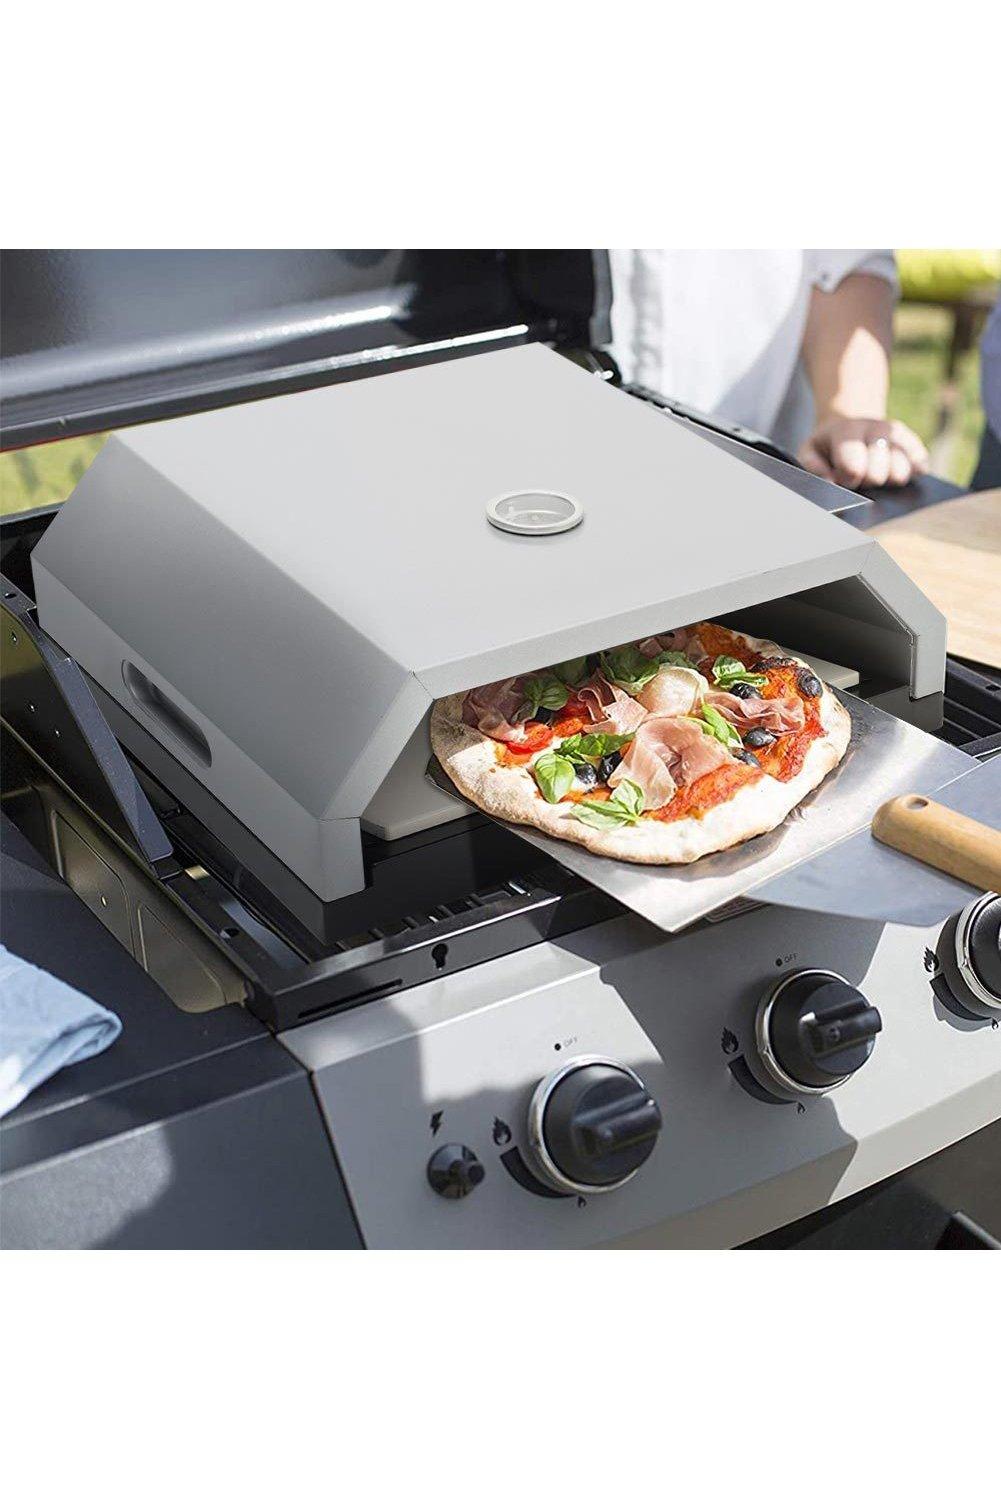 Stainless Steel Pizza Oven with Built-in Temperature Gauge